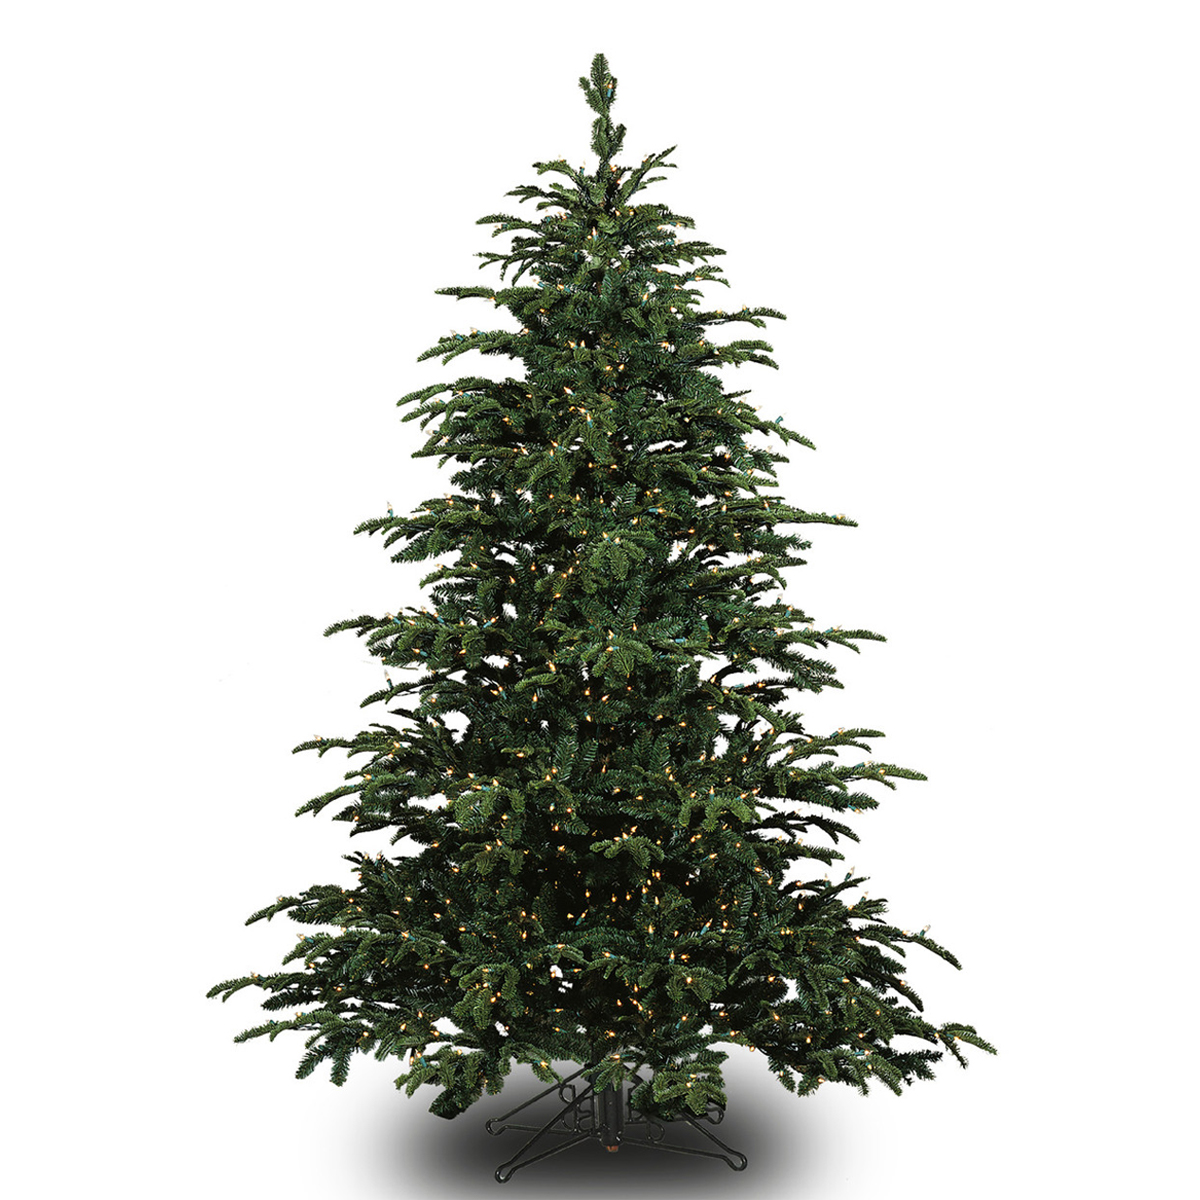 Star Fir Deluxe Christmas Tree - Warm White Glow LEDs - Verdant Green - One-Plug Pole - 10ft Tall